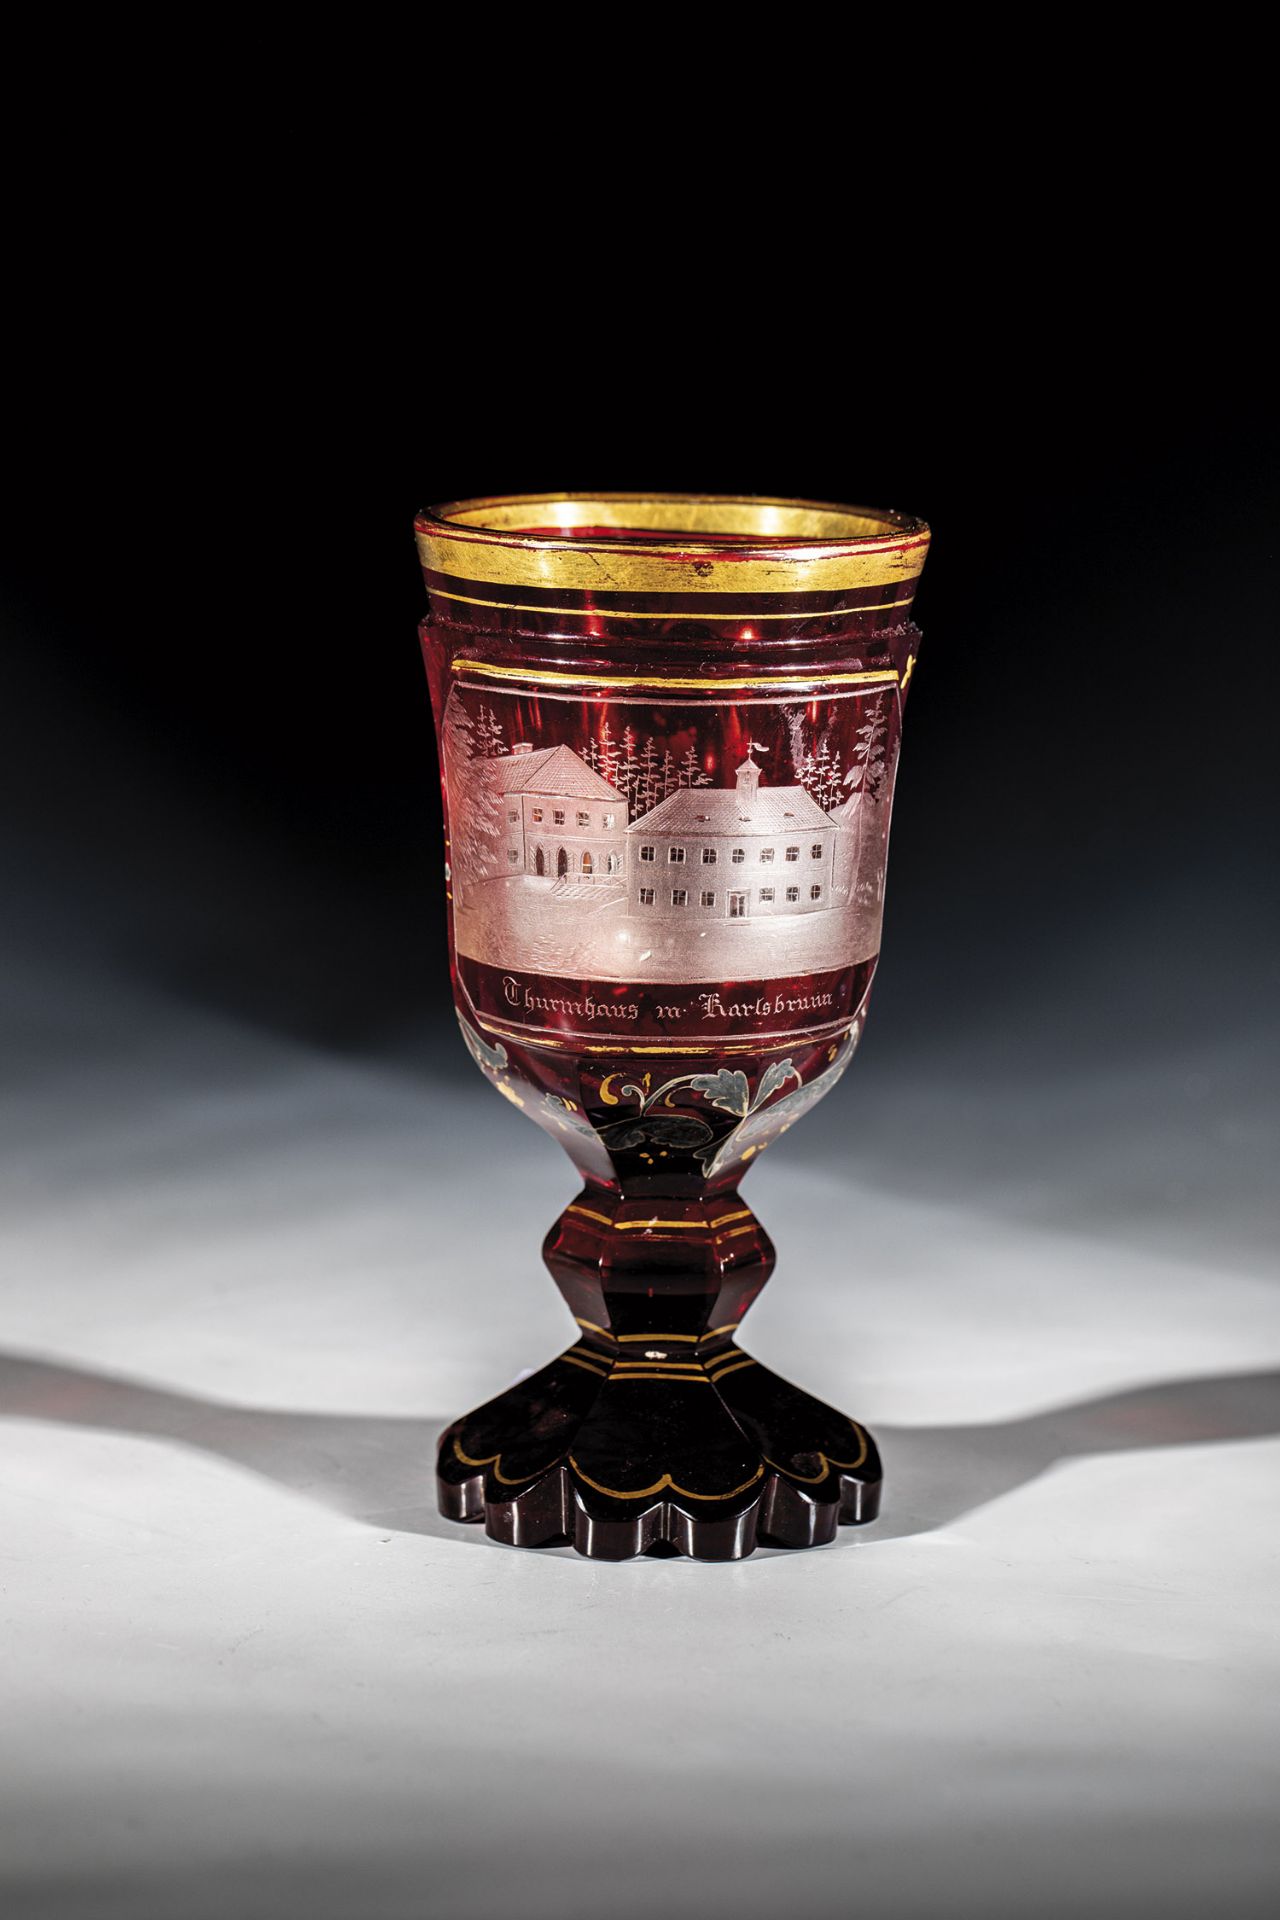 Goblet with a view of Karlsbrunn Bohemia, m. 19th century Colourless, red glazed glass with floral